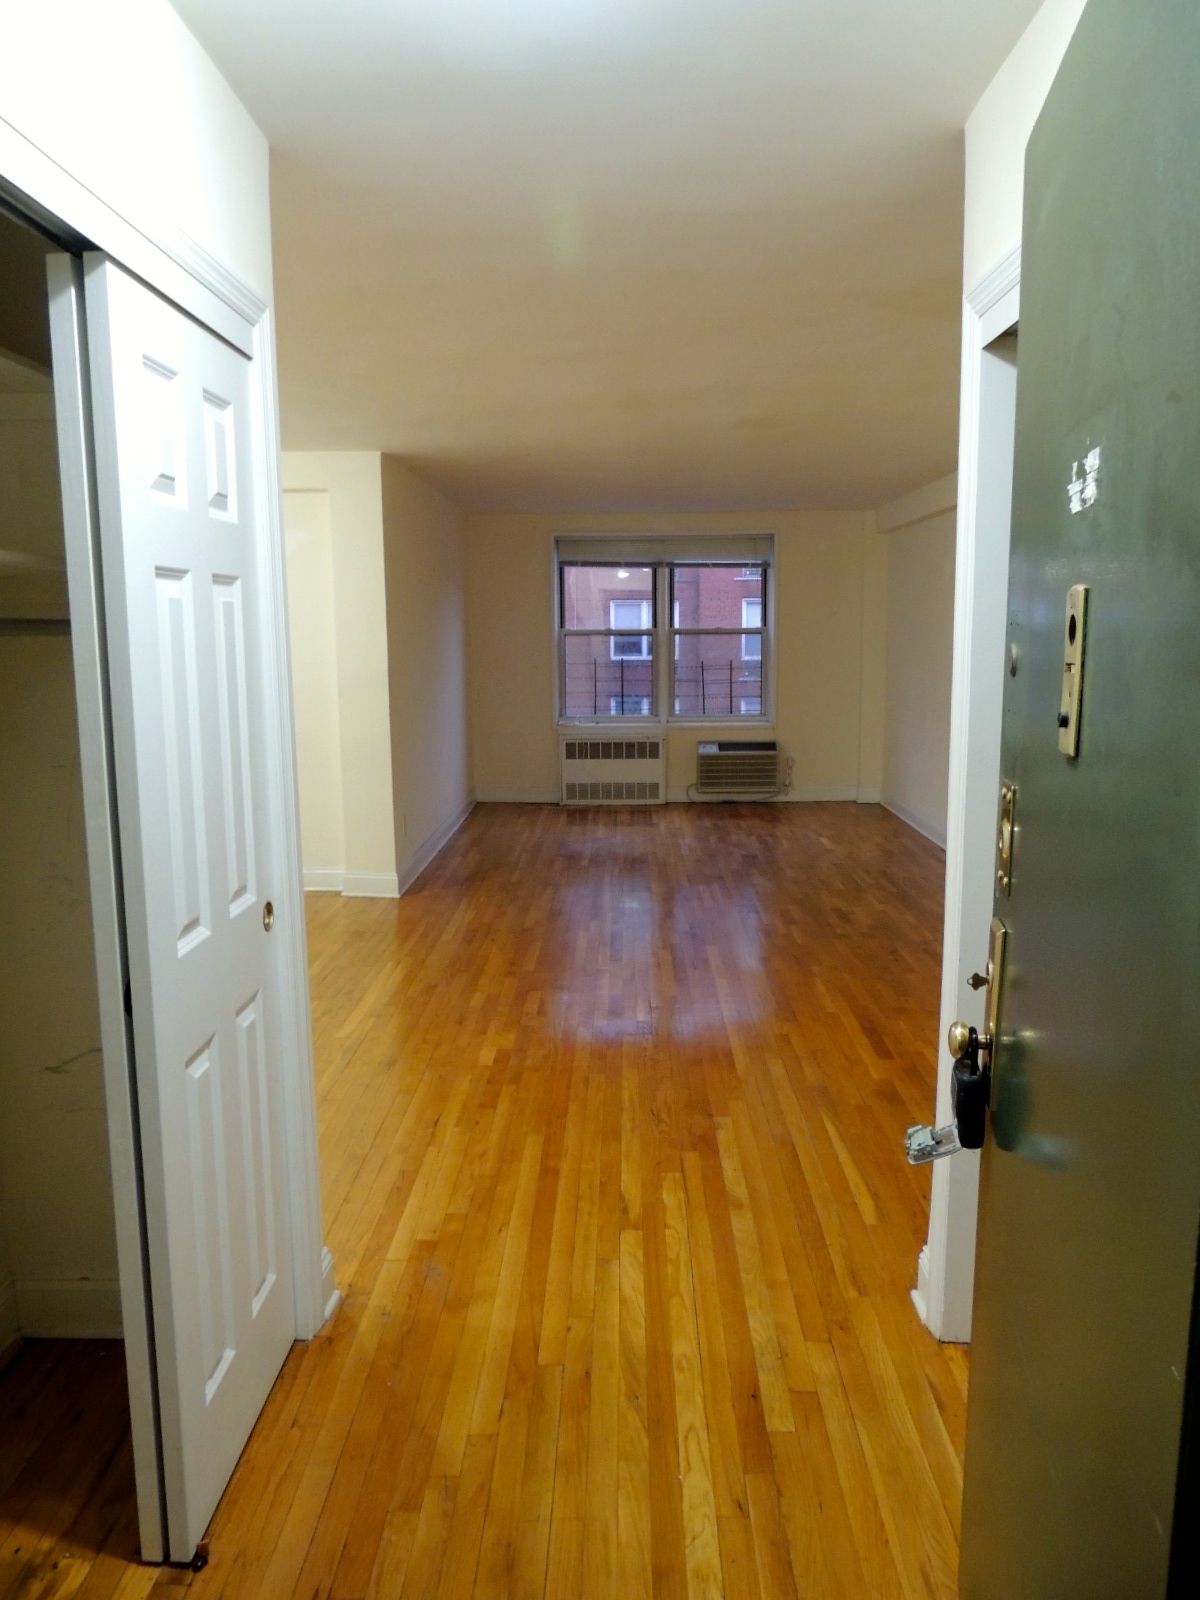 Apartment in Woodside - 32nd Avenue  Queens, NY 11377